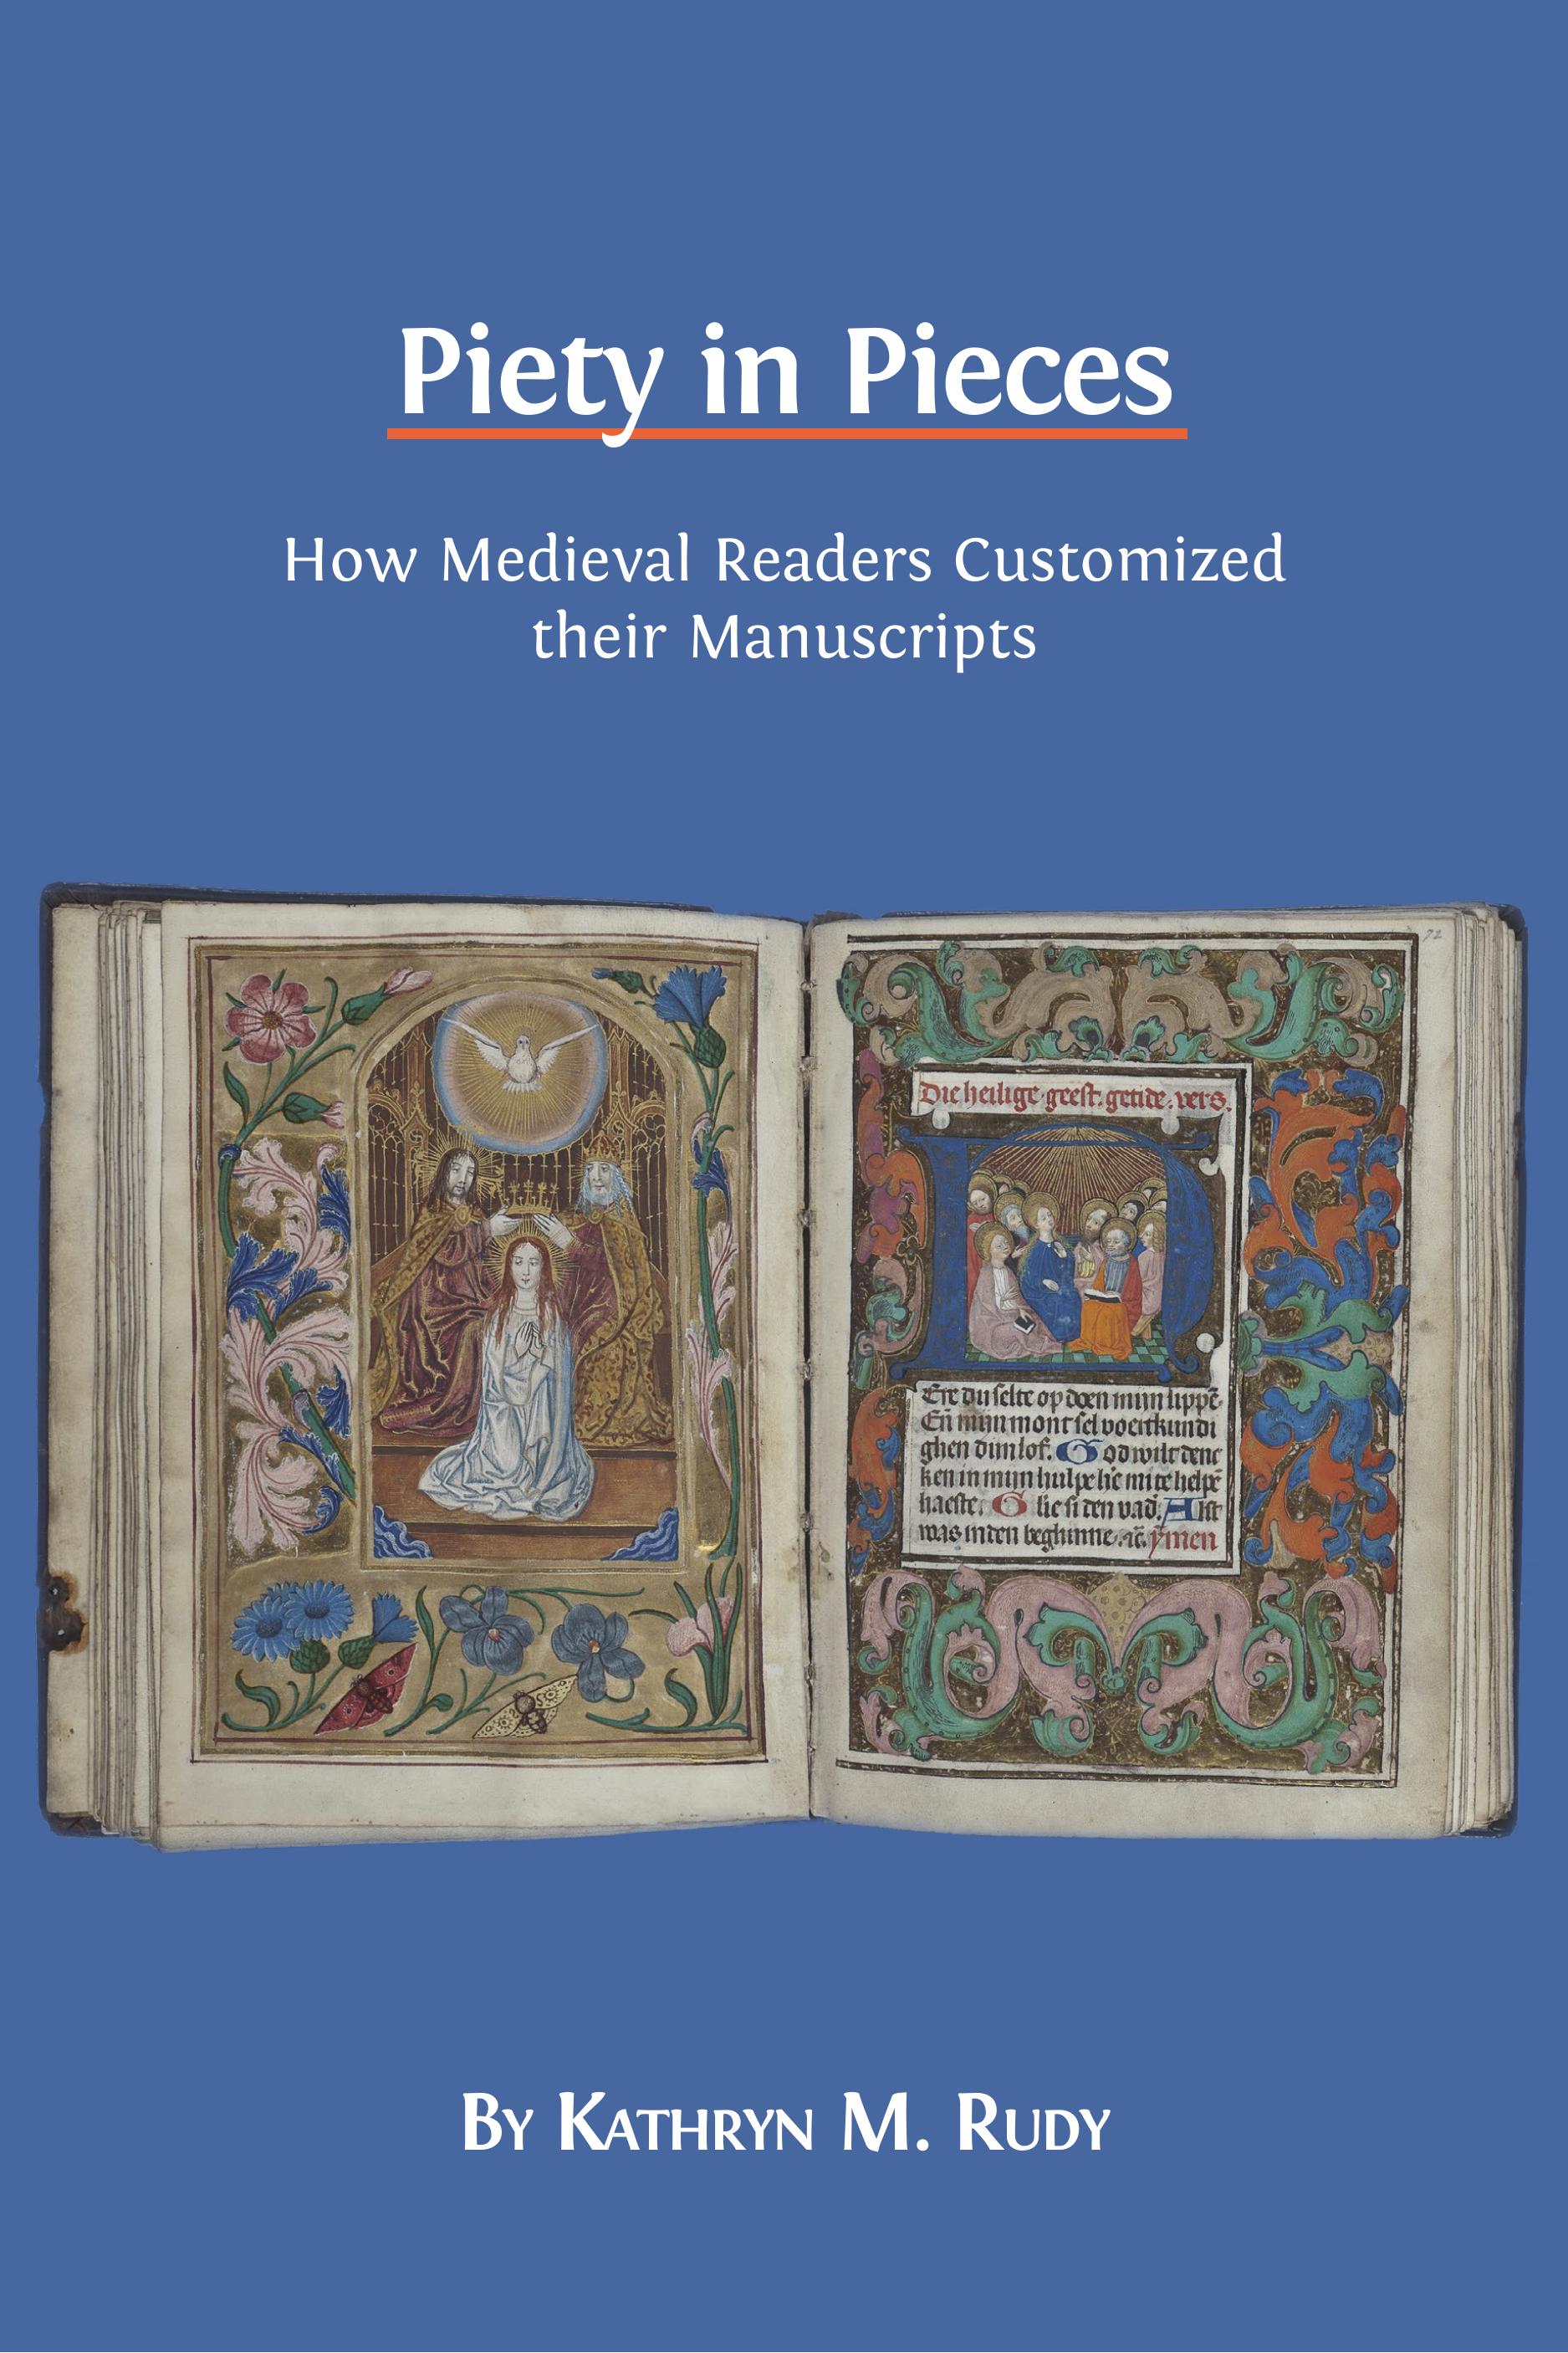 Piety in Pieces: How Medieval Readers Customized their Manuscripts